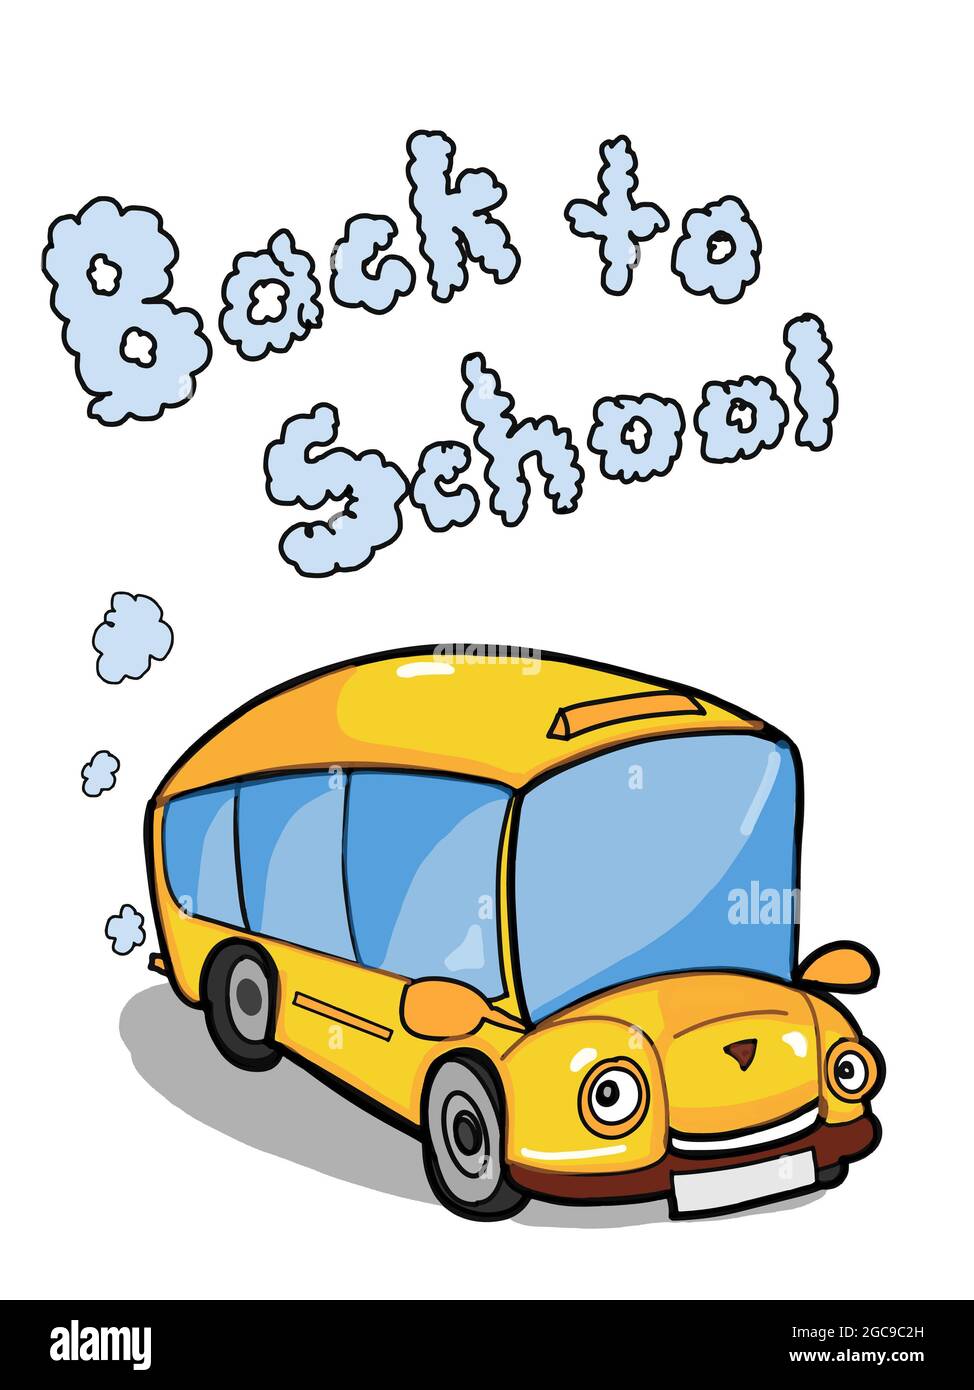 cartoon ,cute school bus, illustration and back to school text Stock Photo  - Alamy